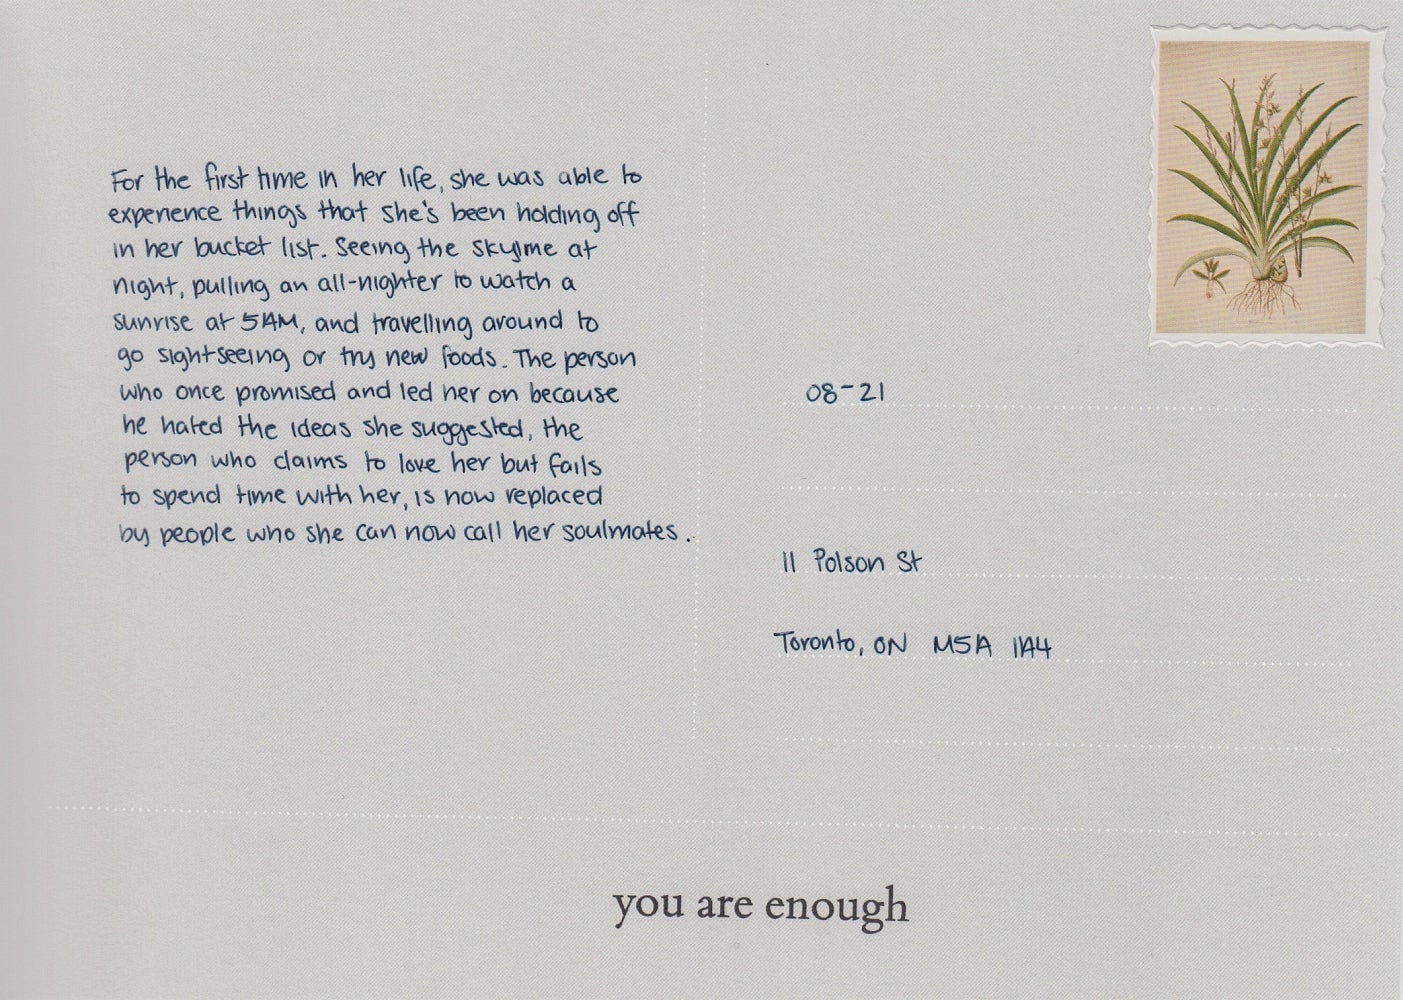 Artwork of the note on the back of a postcard, which reads like a diary entry or memory.